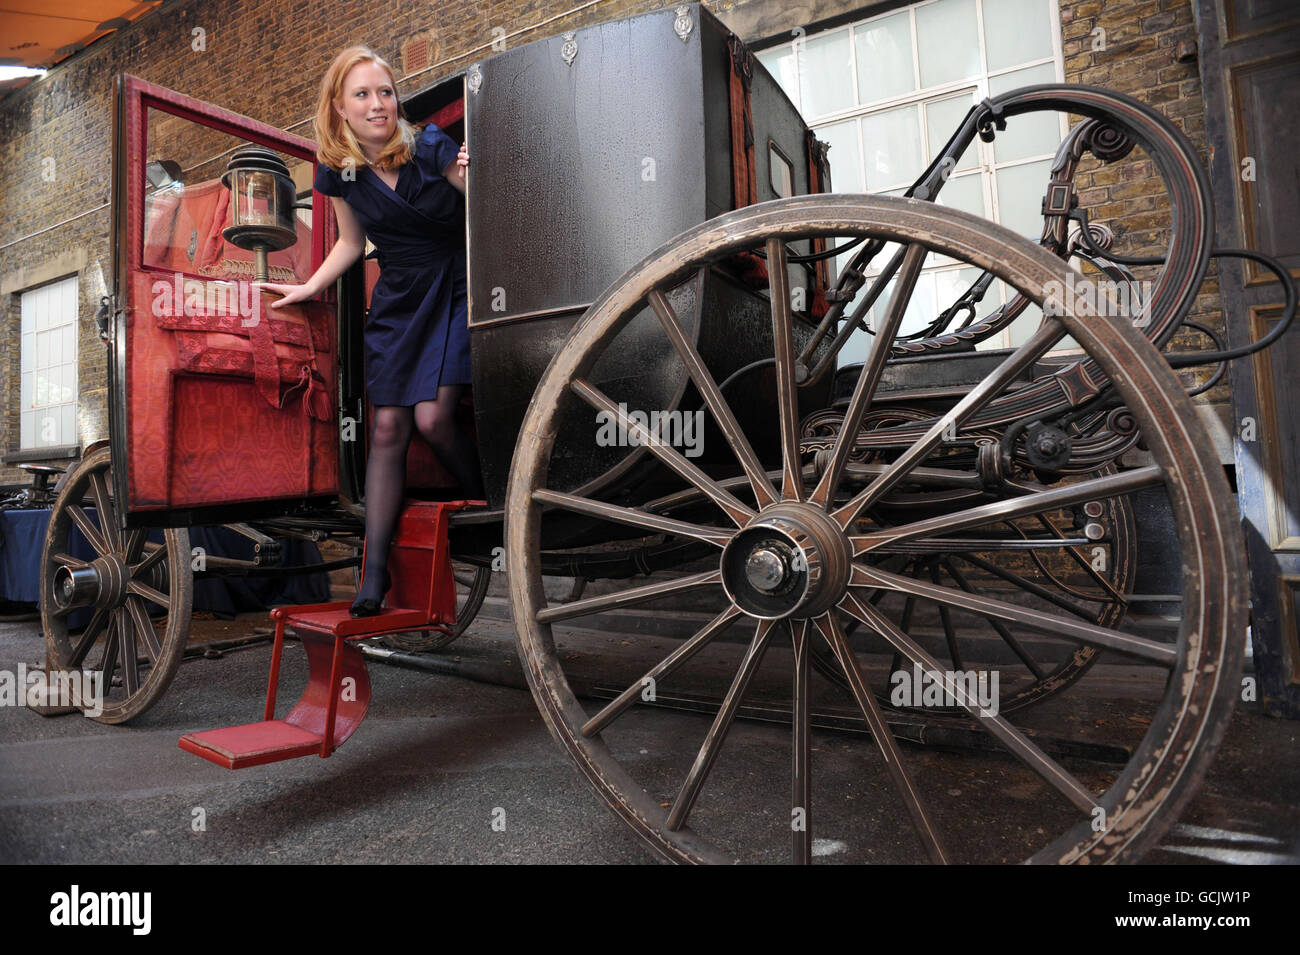 Charlotte Alport of Christies gets out of a state chariot owned by Lord and Lady Spencer in the late 19 century and will be offered for sale by Christies as part of a sale from the Althorp carriage collection and a wider sale of art, from the stables, cellars and storerooms at Althorp. The carriage pictured is expected to fetch 50,000 - 80,000. Stock Photo